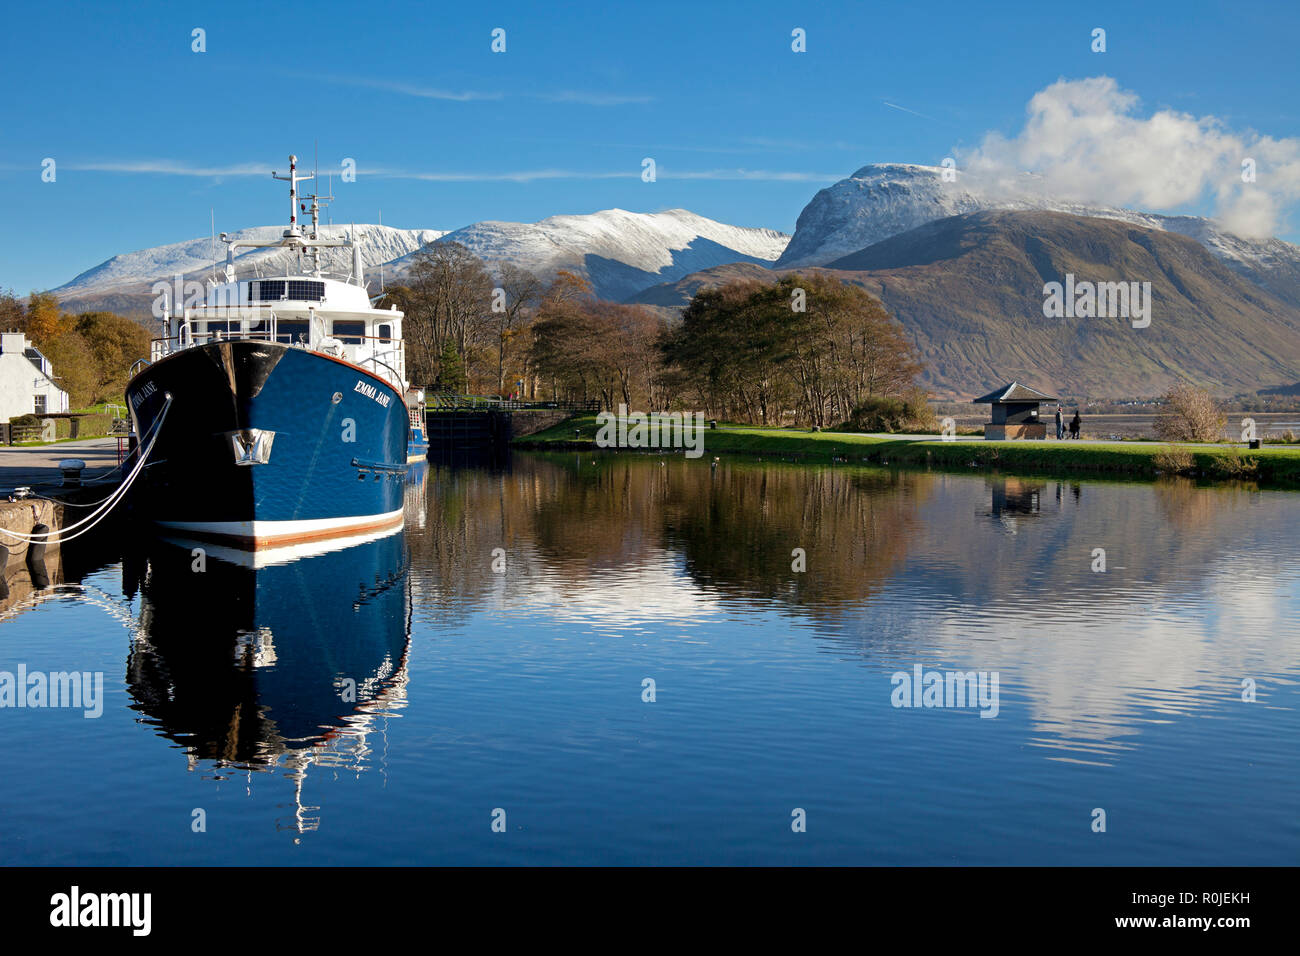 Ship docked at Corpach basin with Ben Nevis in background, Lochaber, Scotland, UK Stock Photo